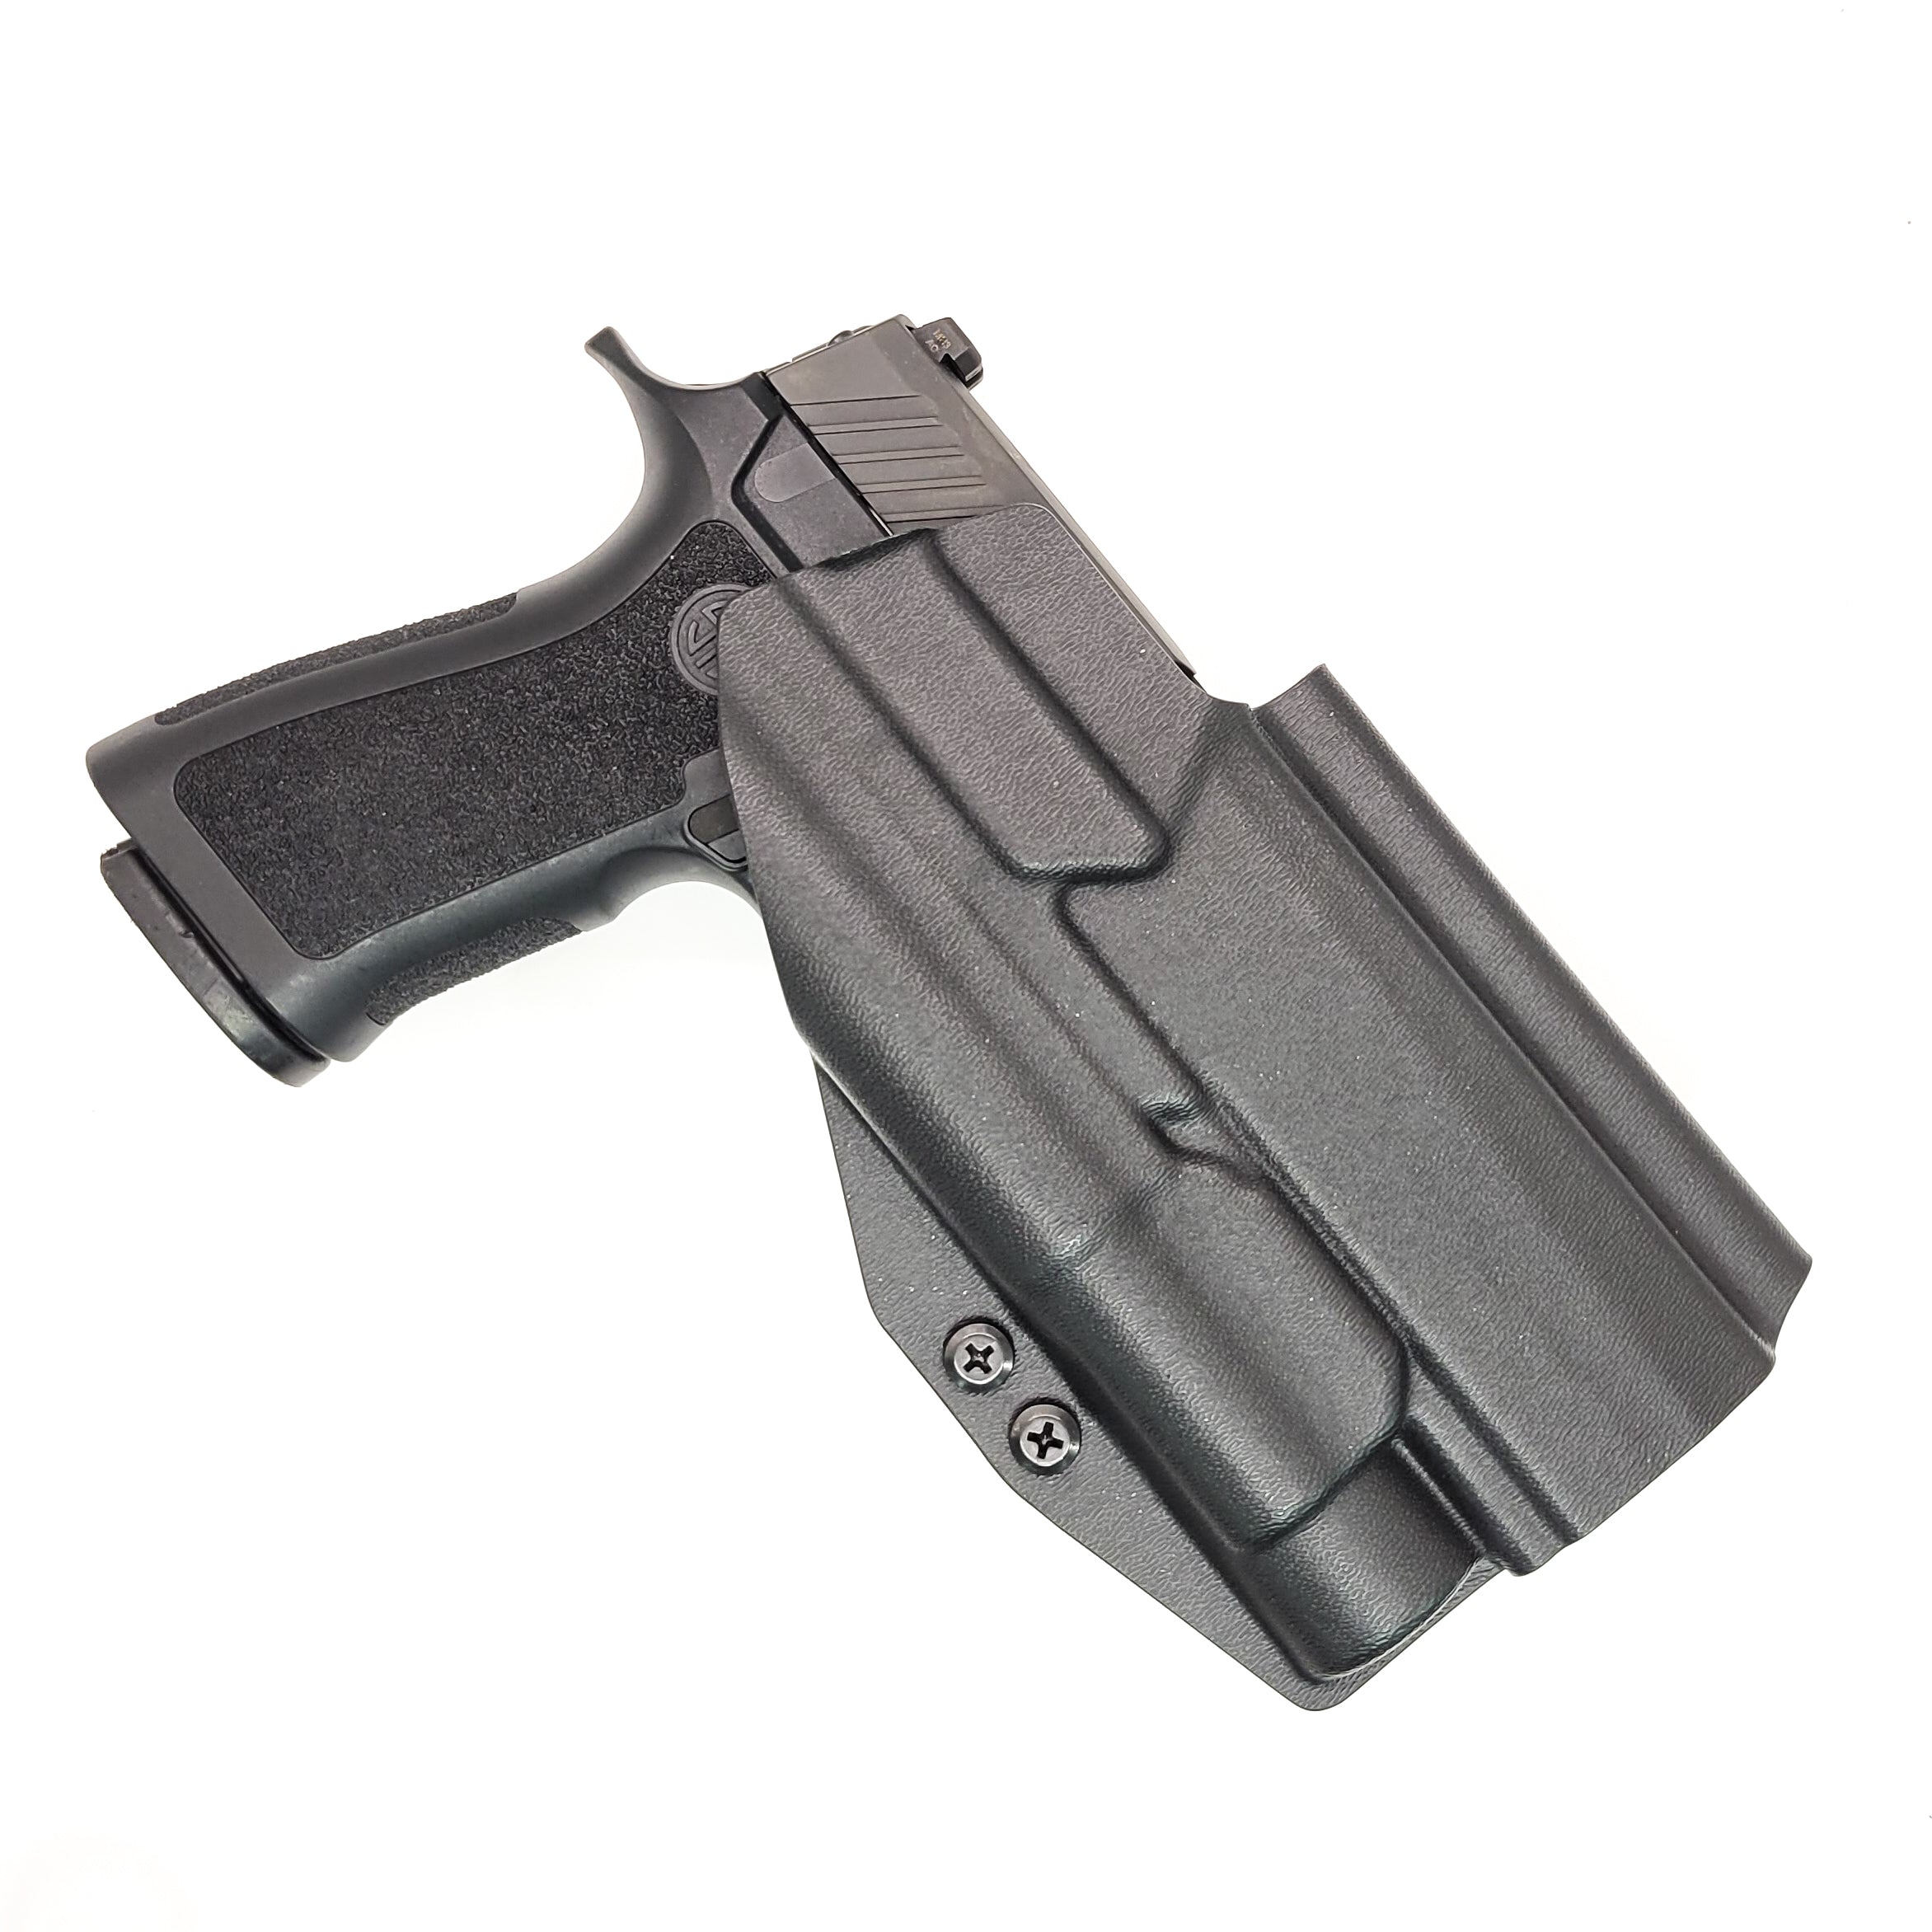 For the best Outside Waistband OWB Holster designed to fit the Sig Sauer P320 Full Size, Carry, Compact, M17, M18, and X-Five, X5 pistols with the Streamlight TLR-1, shop Four Brothers Holsters. Full sweat guard, adjustable retention. Made from .080" kydex with minimal material and smooth edges to reduce printing